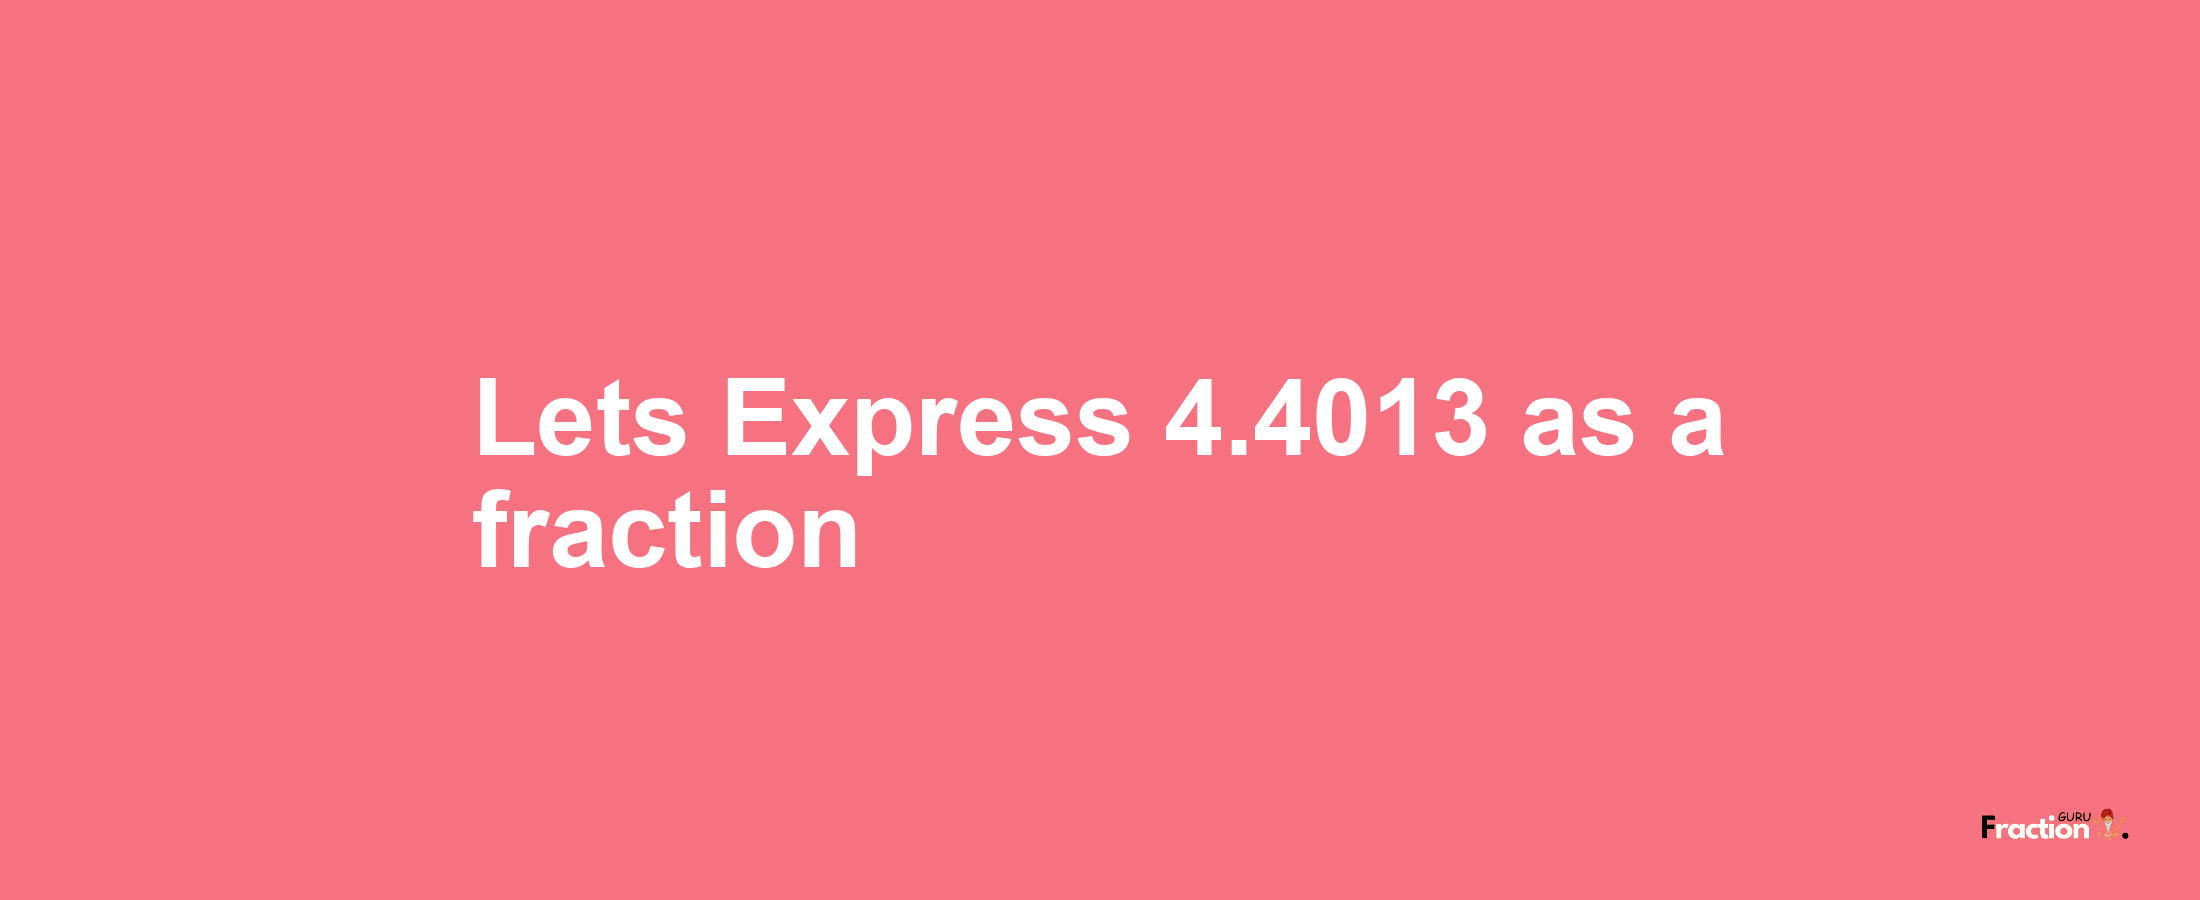 Lets Express 4.4013 as afraction